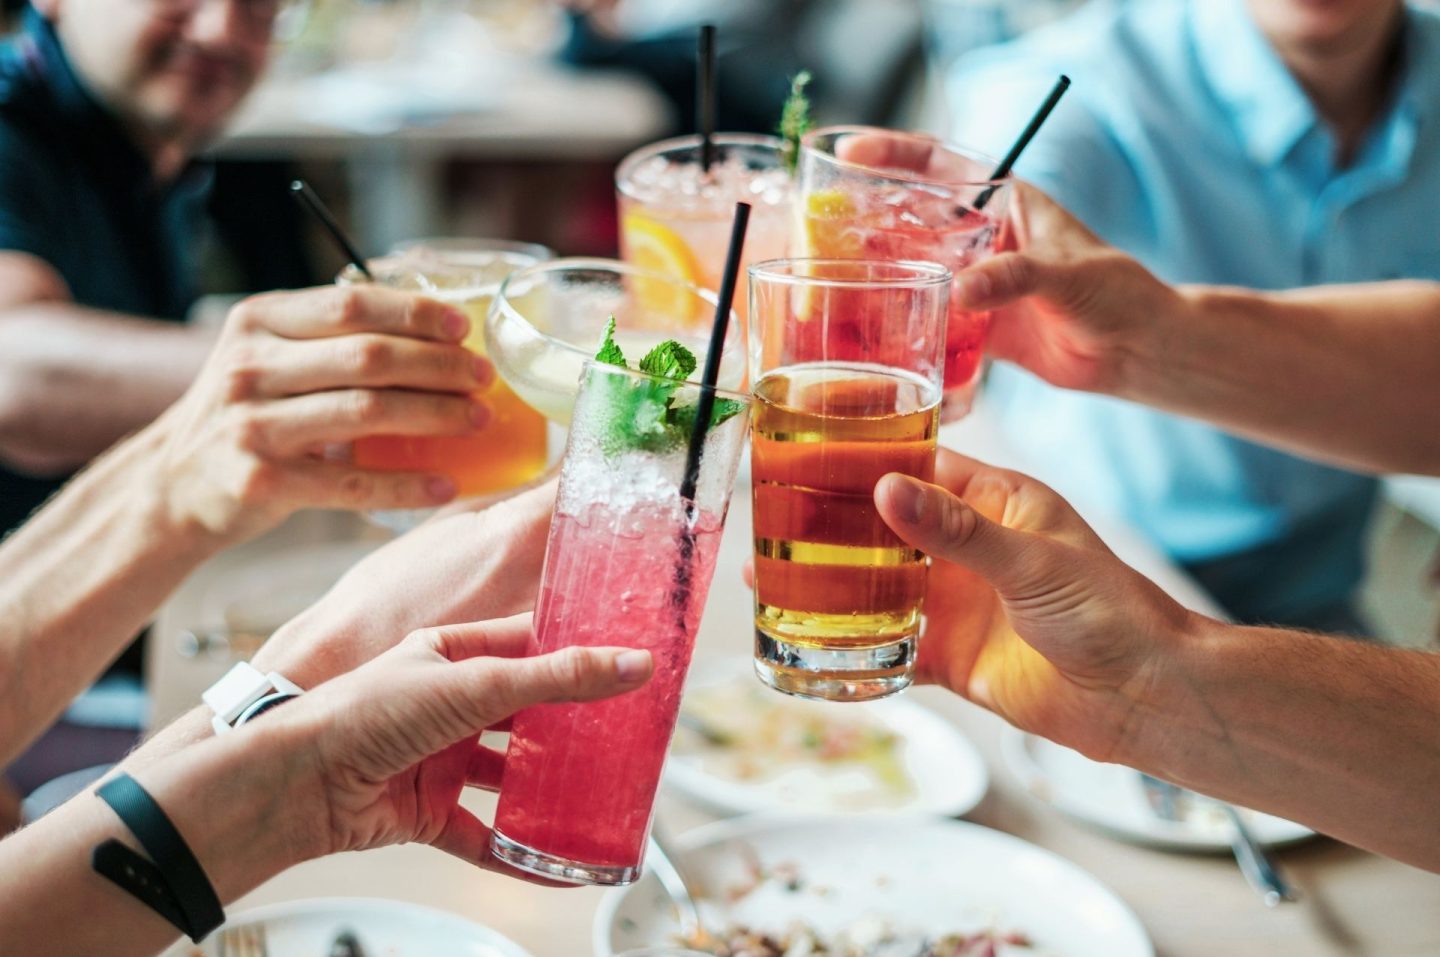 A photo of several hands holding glasses of colourful drinks we assume are alcohol as they clink them together in celebration.